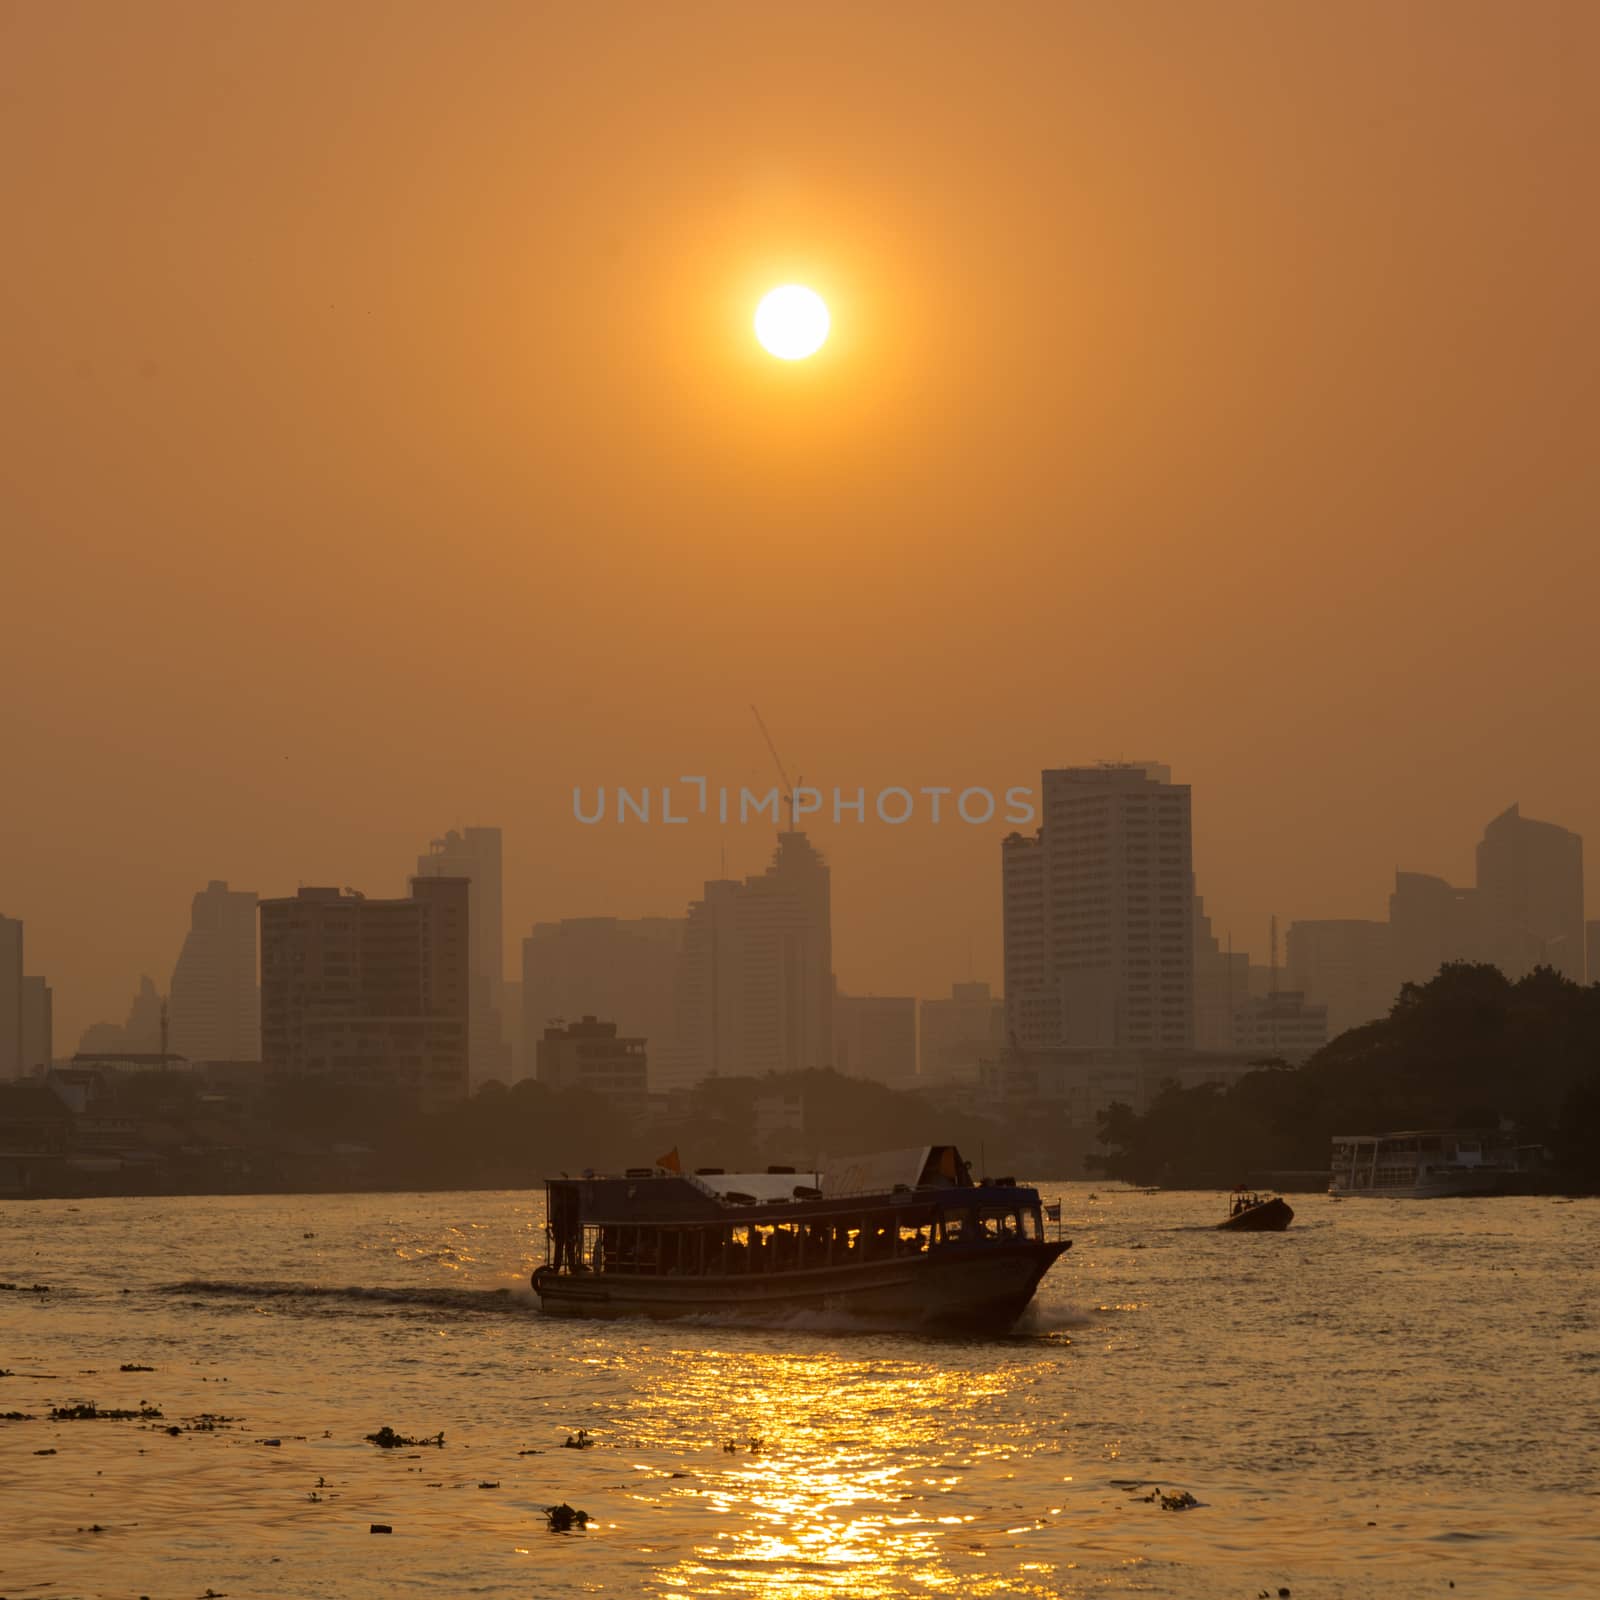 Boat traffic on the river, Bangkok city. by a454